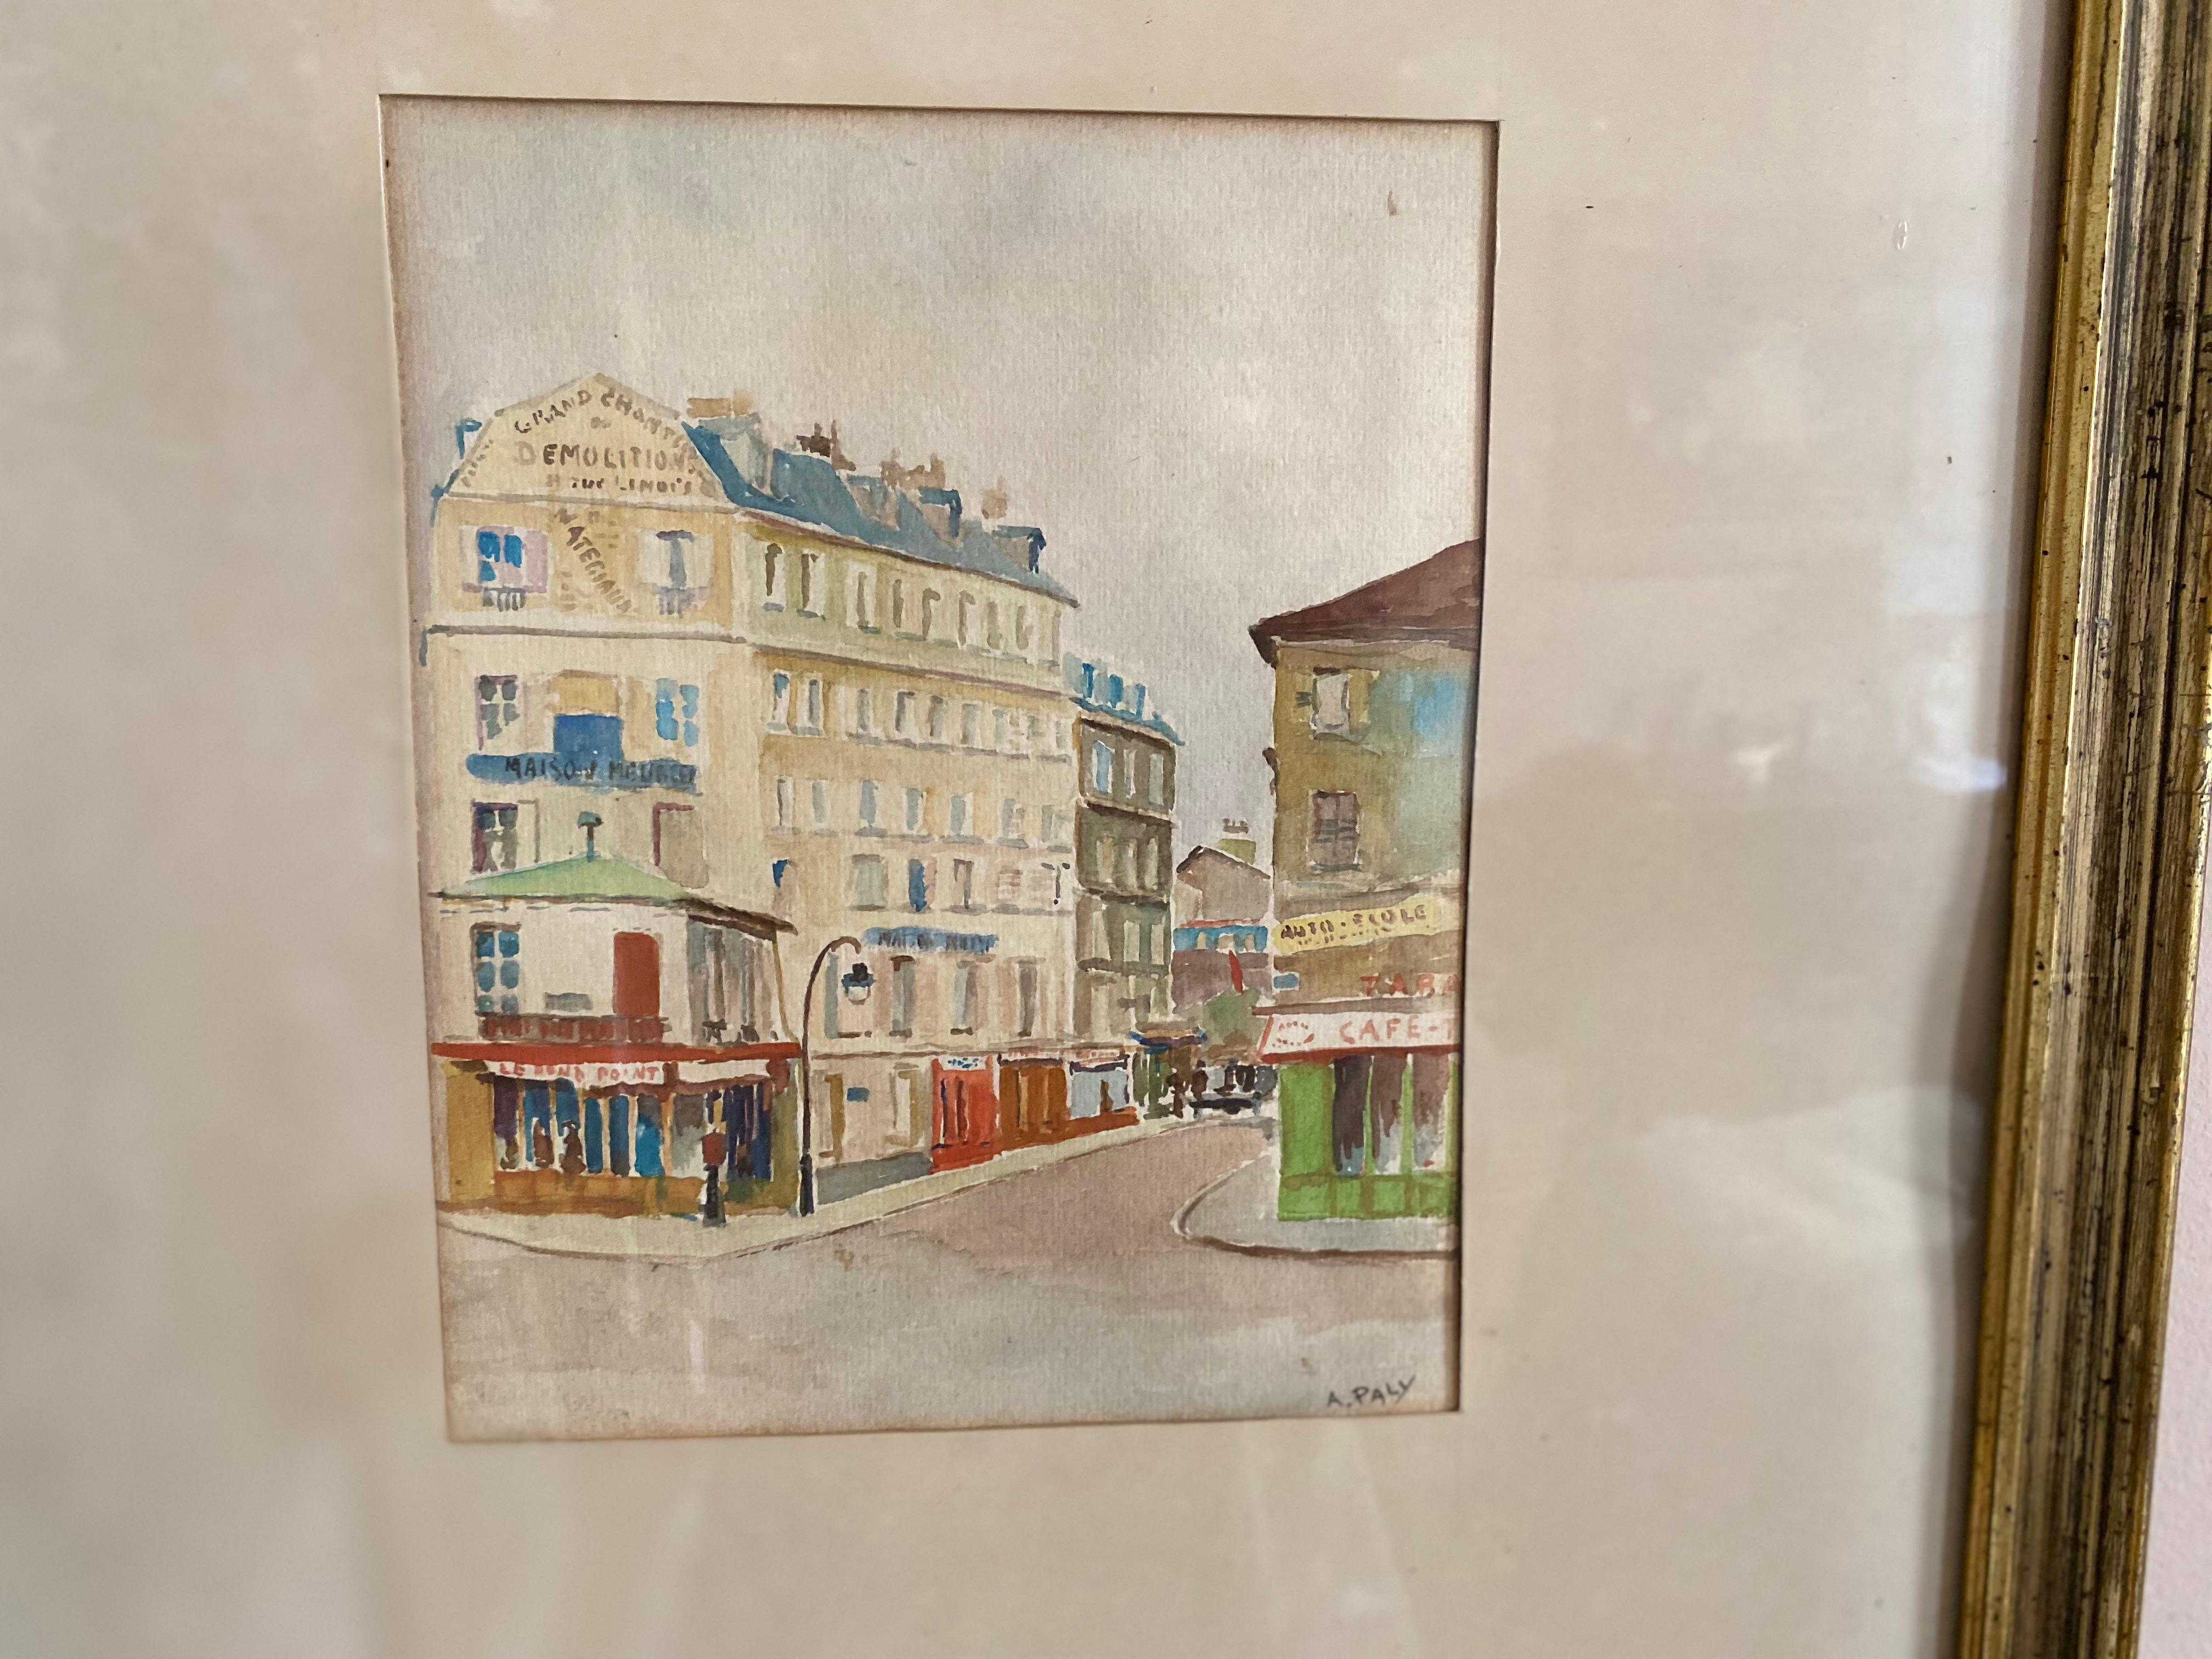 Watercolor of a Paris street scene with a „Berliner Leiste“ frame by A. Paly For Sale 3